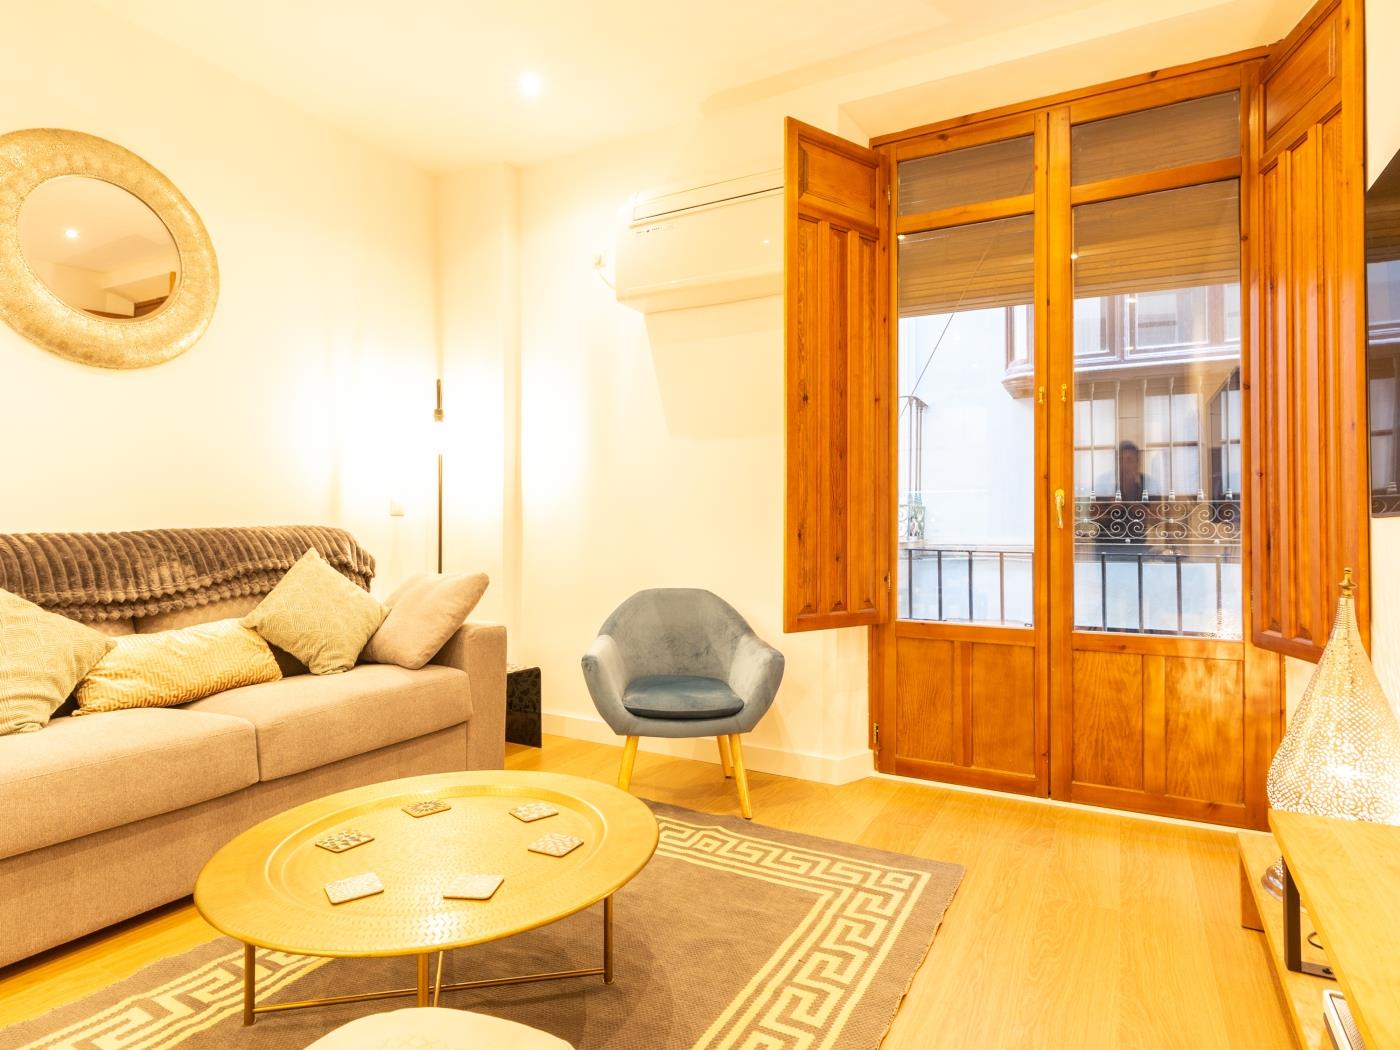 Apto Catedral. Lovely apartment with the best location in Central Granada. in Granada